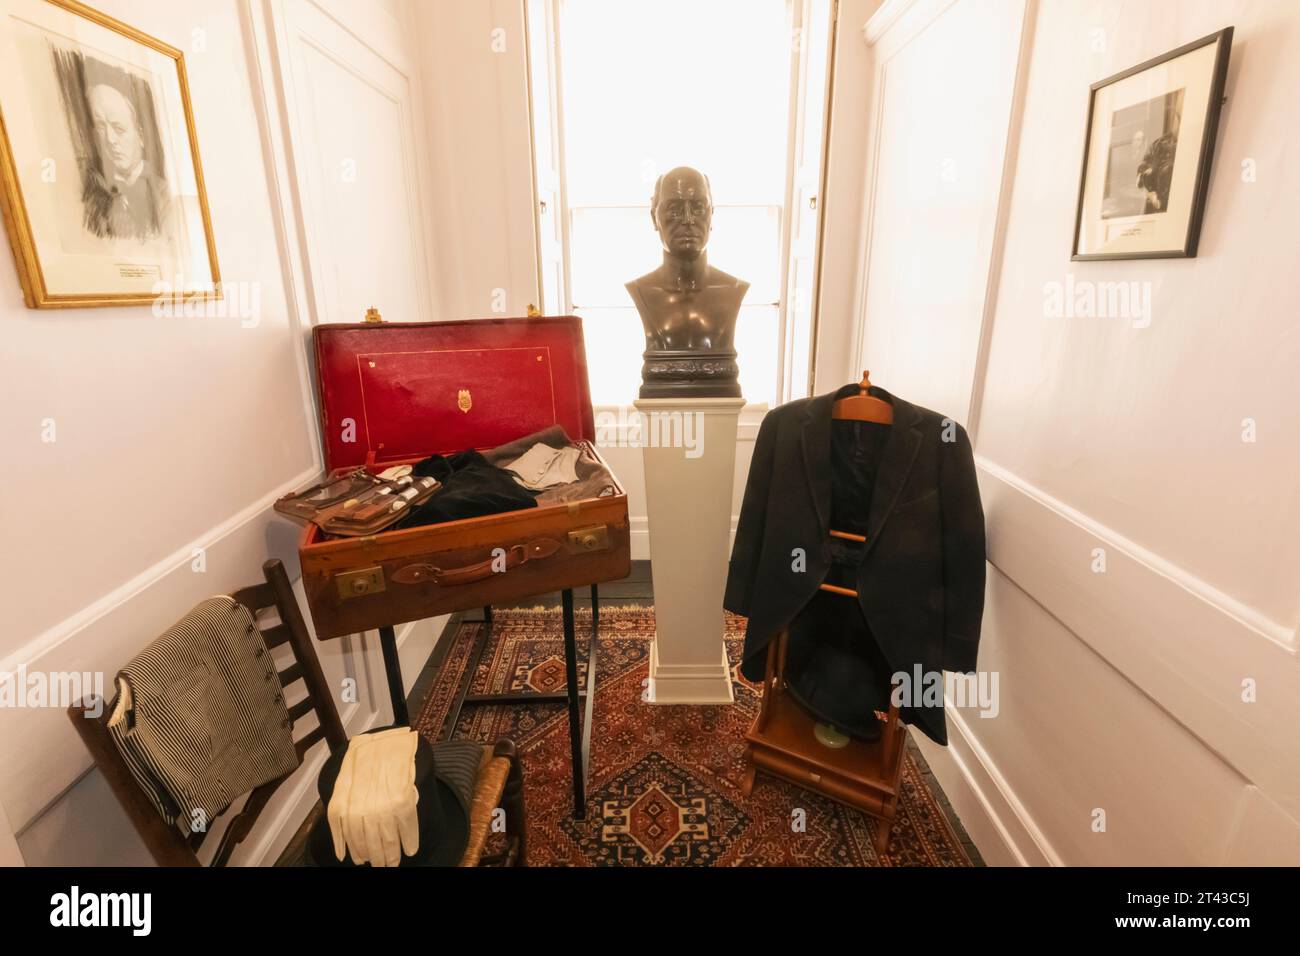 England, East Sussex, Rye, Lamb House, One Time Home of the Writer Henry James, Display of Personal Articles owned by Henry James Stock Photo